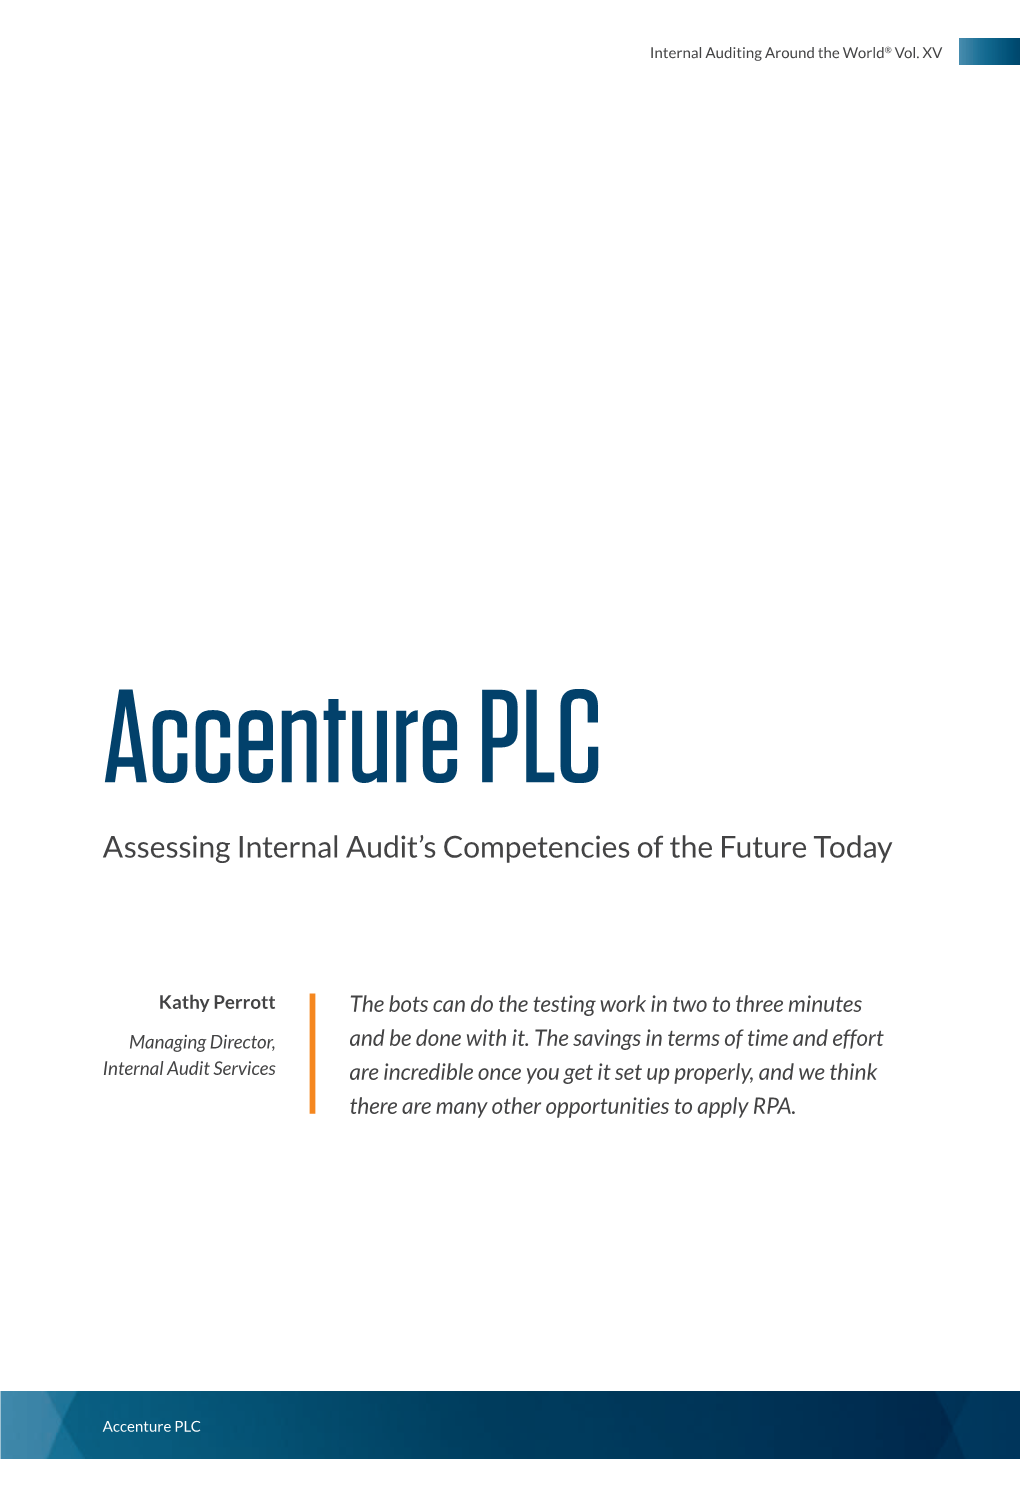 Assessing Internal Audit's Competencies of The